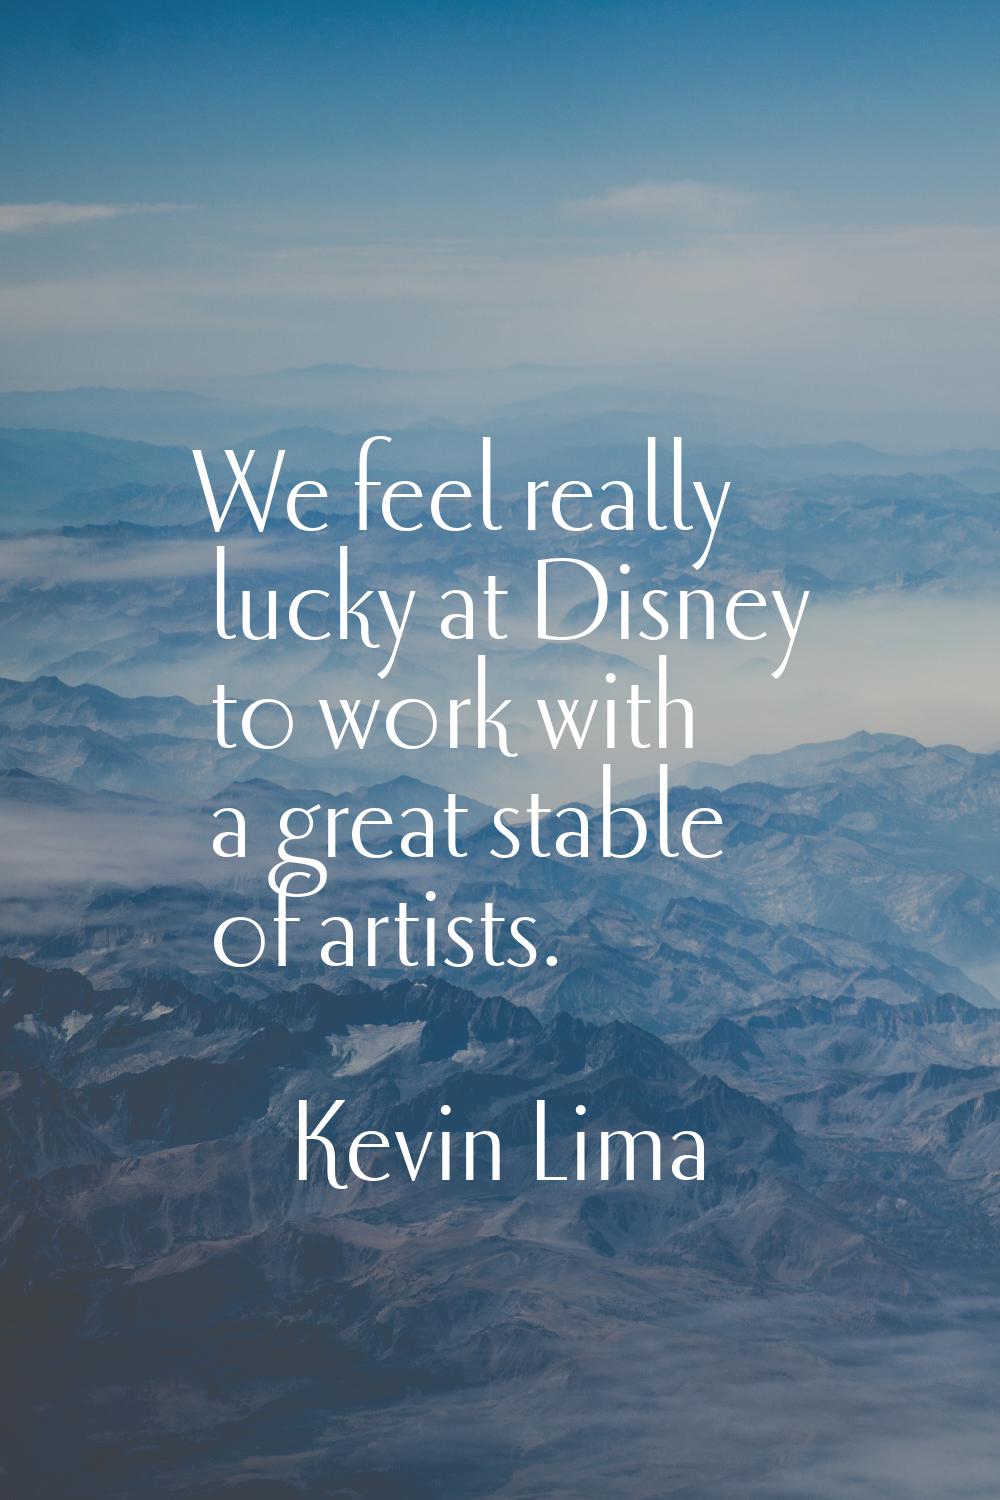 We feel really lucky at Disney to work with a great stable of artists.